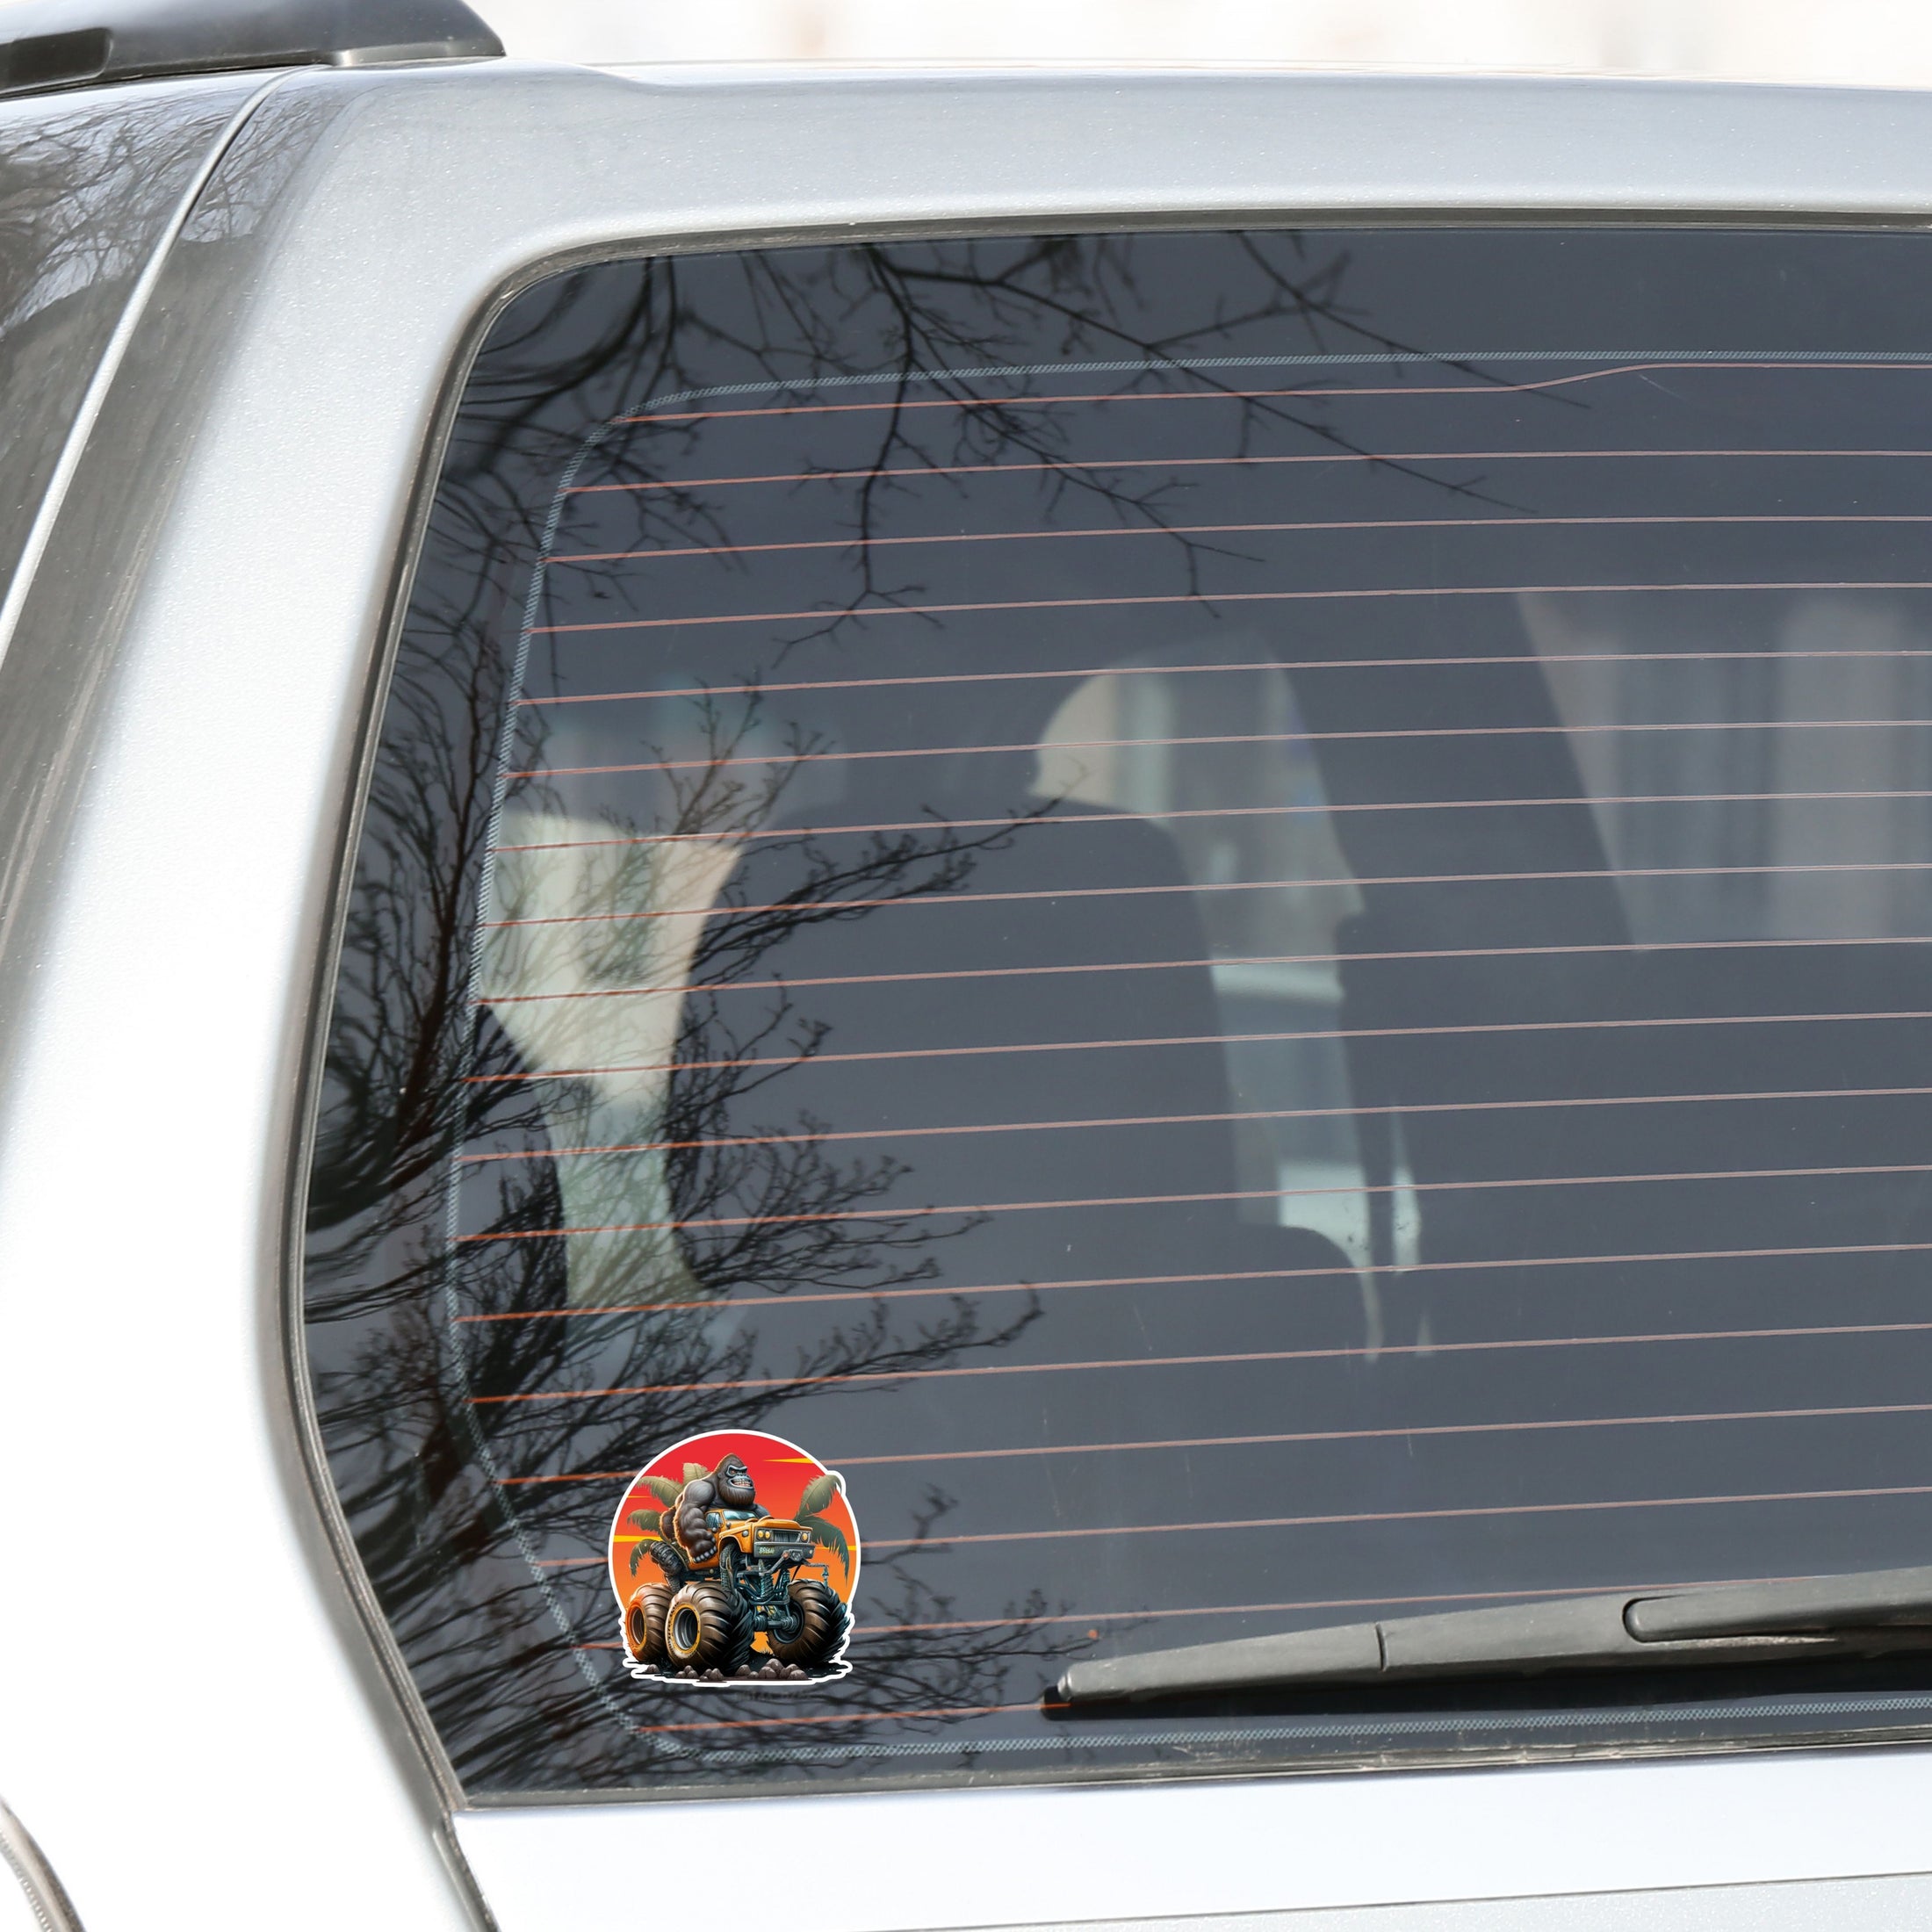 This image shows the gorilla monster truck sticker on the back window of a car.